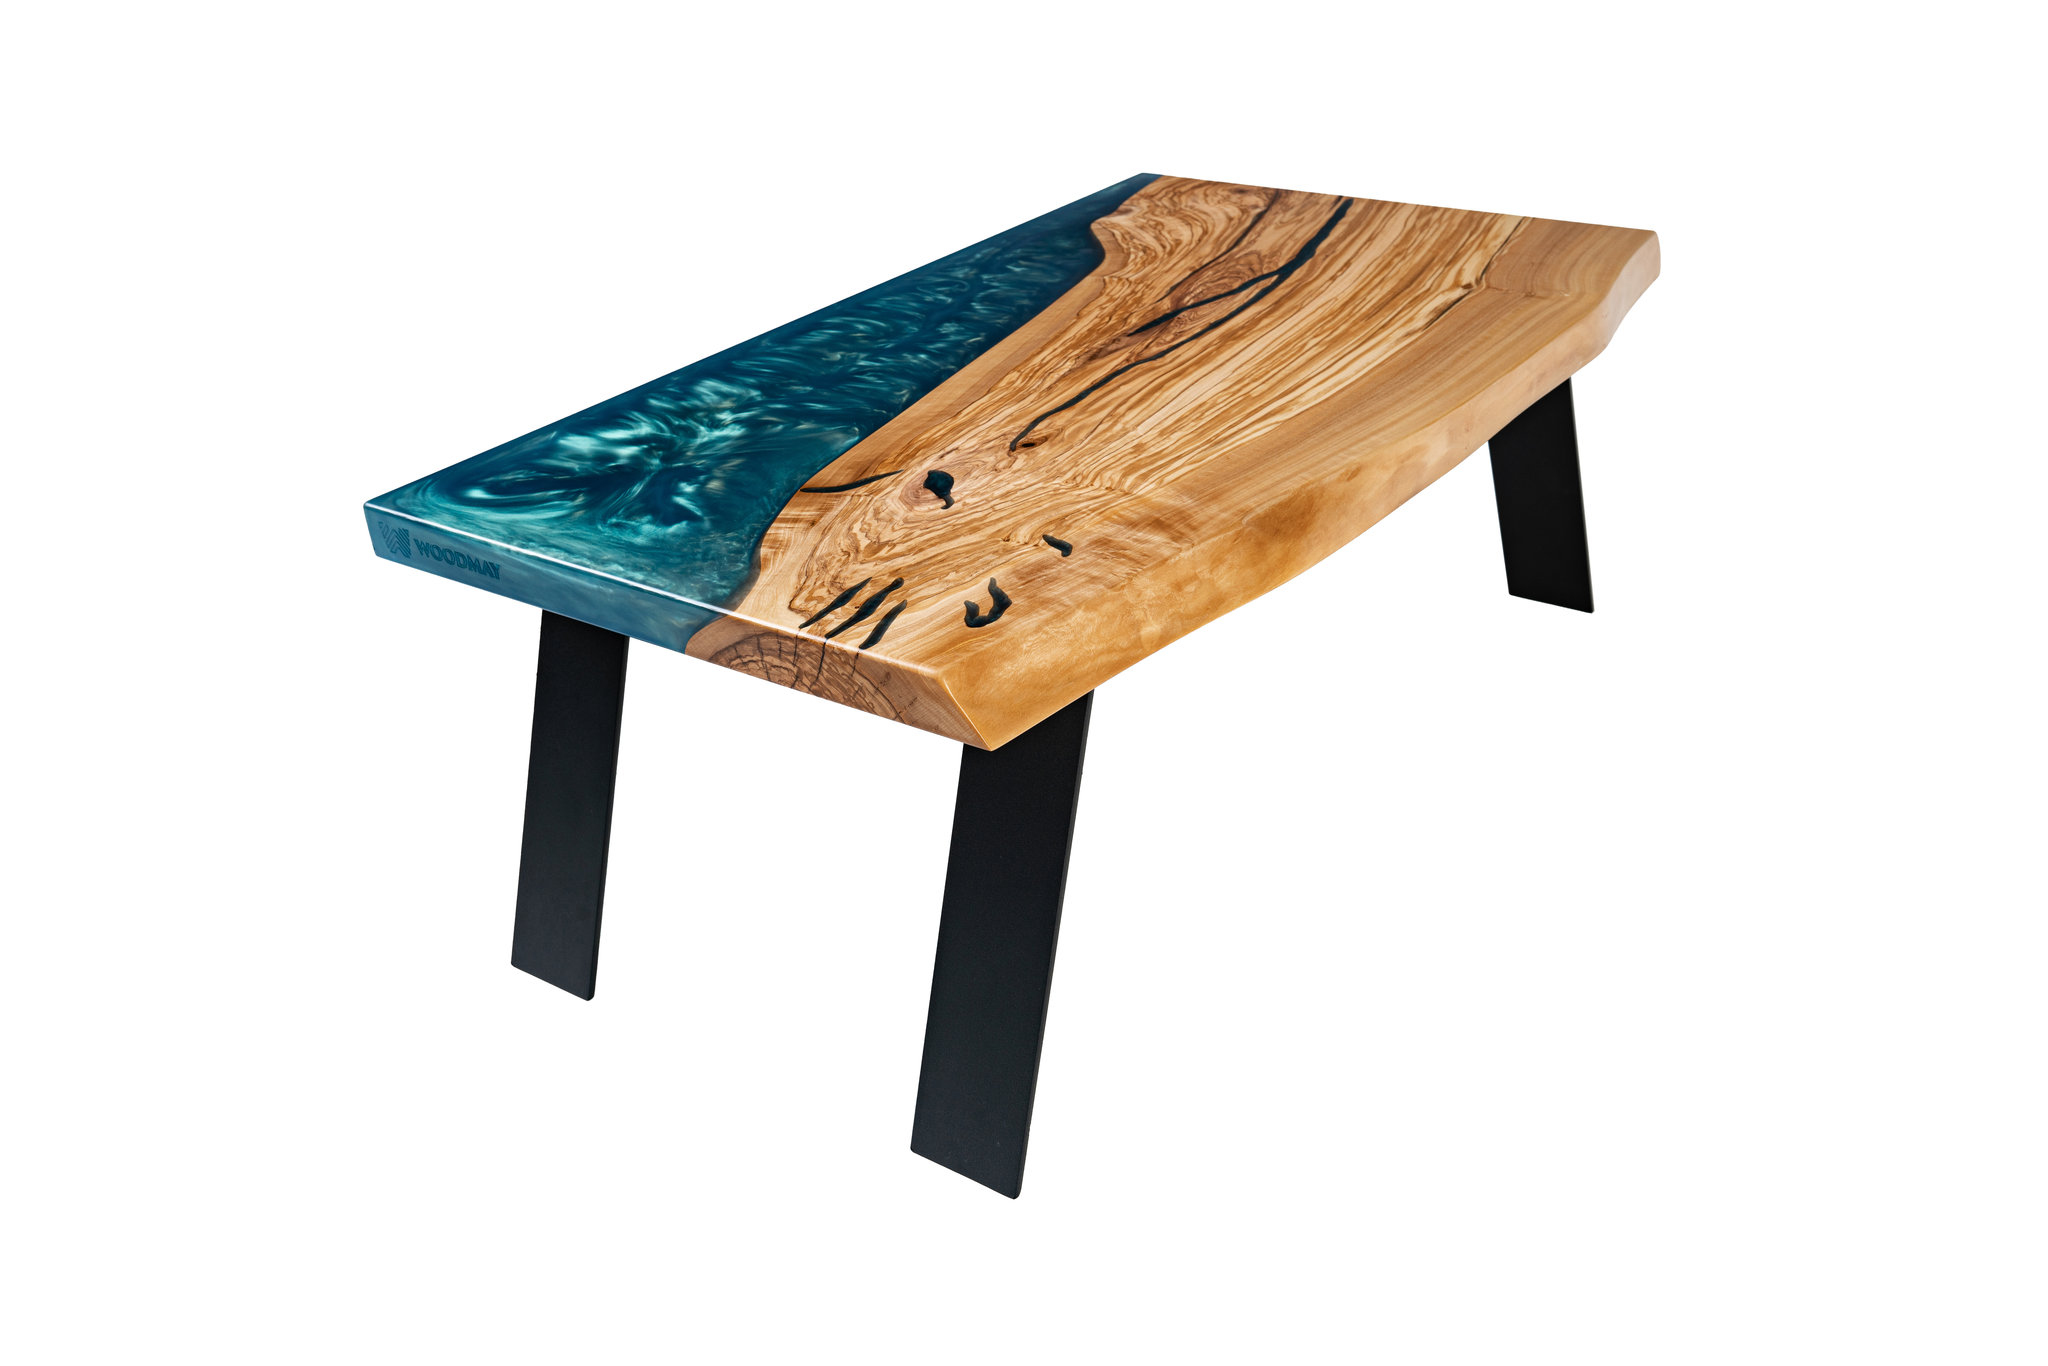 Bec coffee table in solid olive wood with blue epoxy resin.